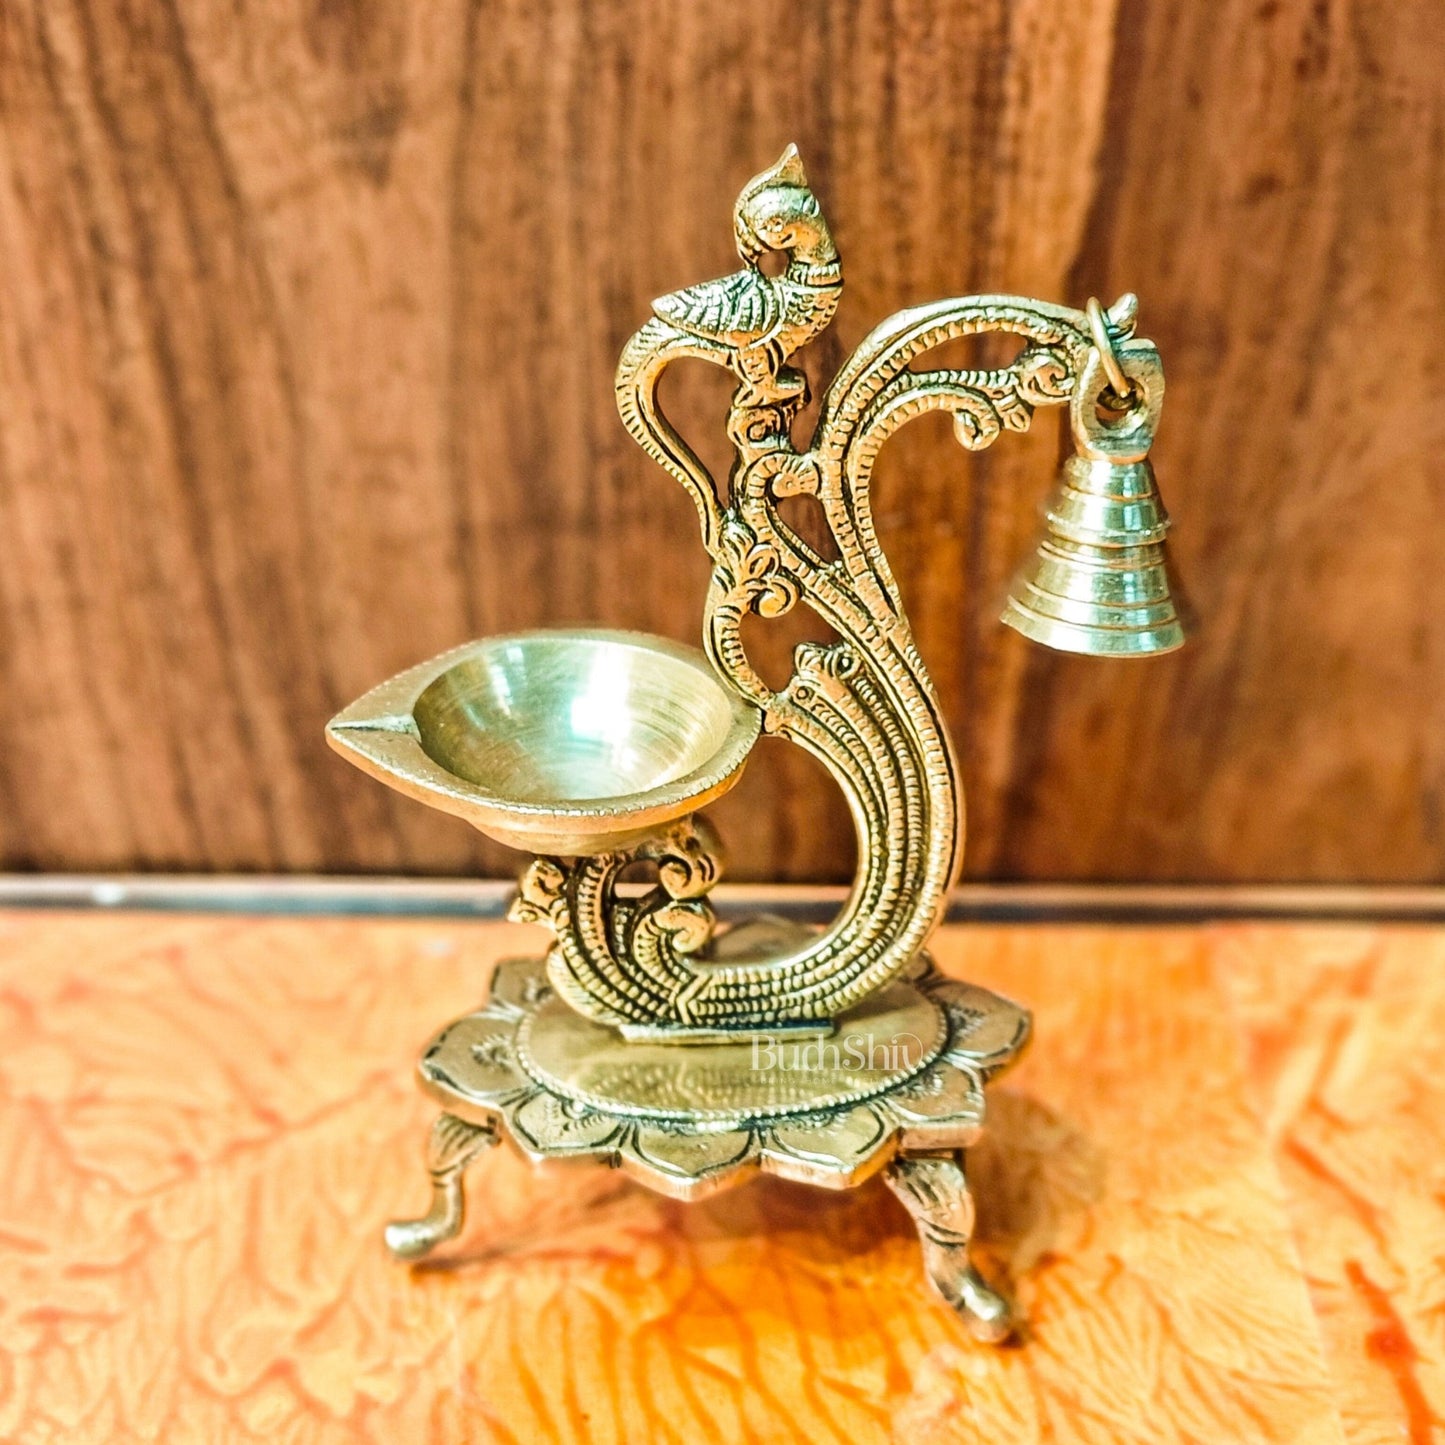 Brass parrot lamp with bell - Budhshiv.com